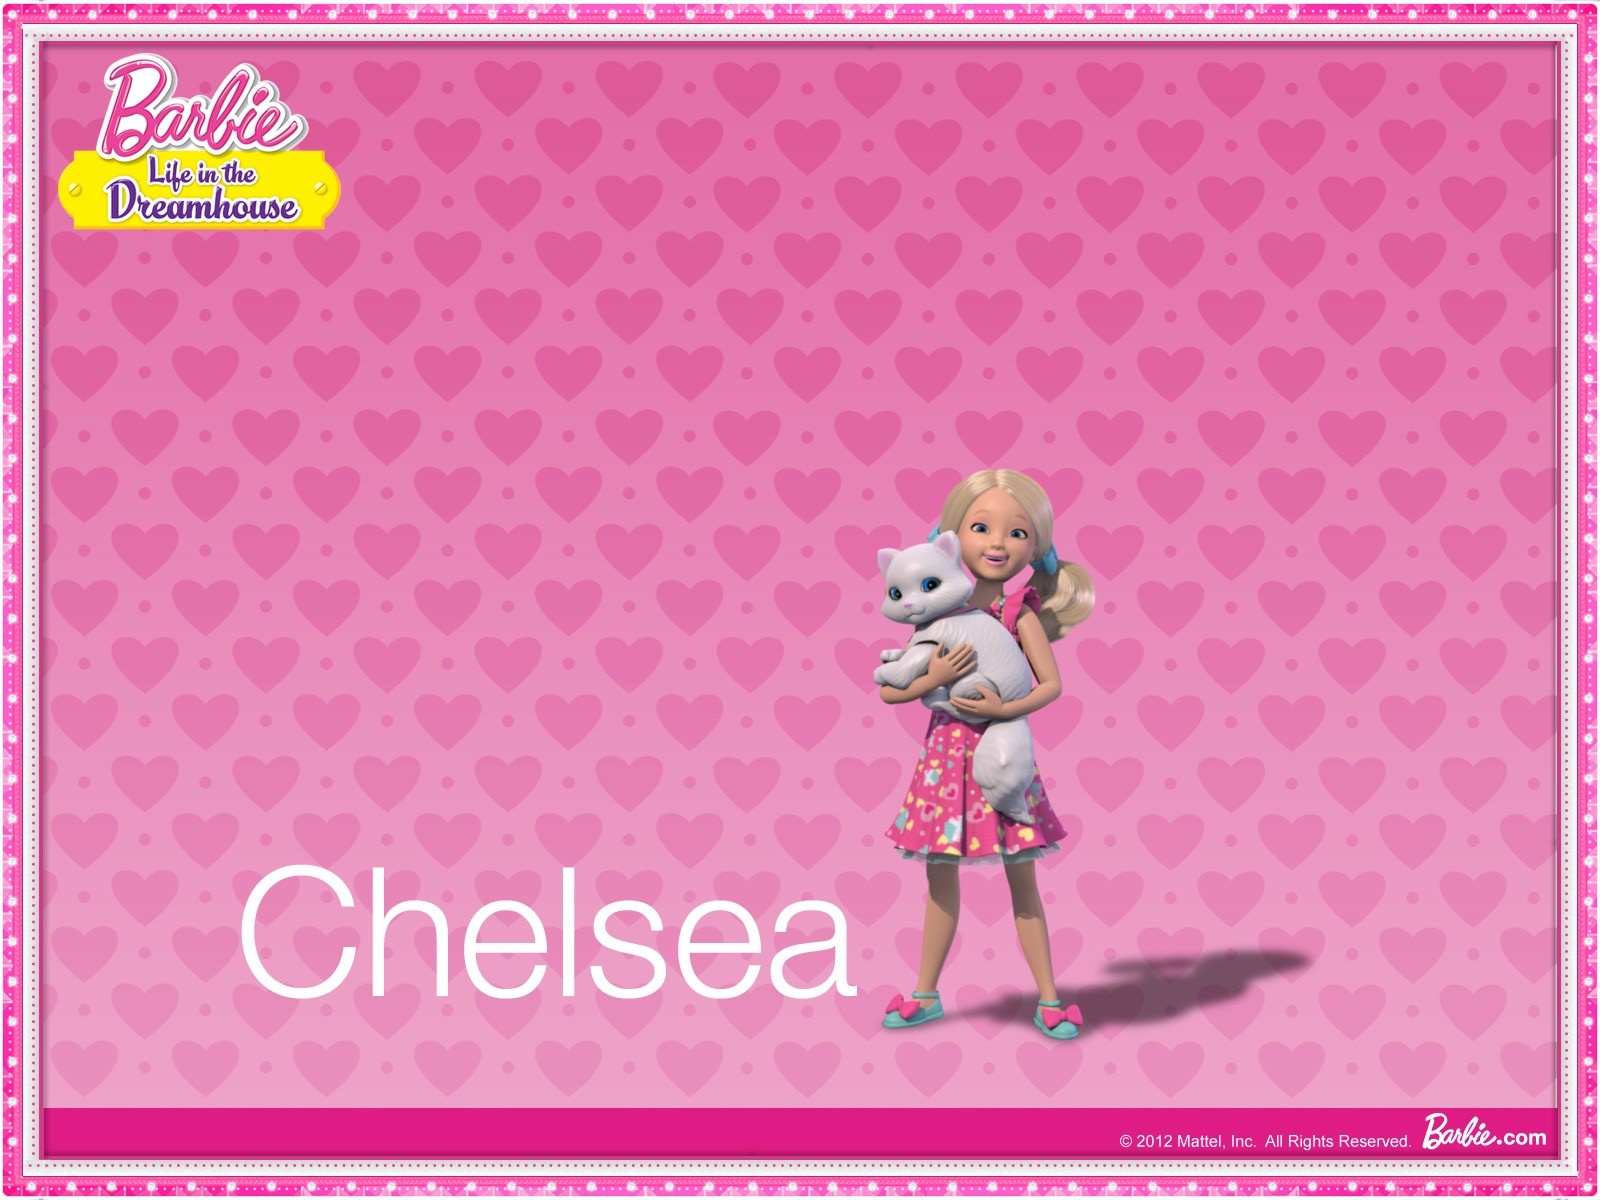 barbie life in the dreamhouse Barbie Movies Wallpaper